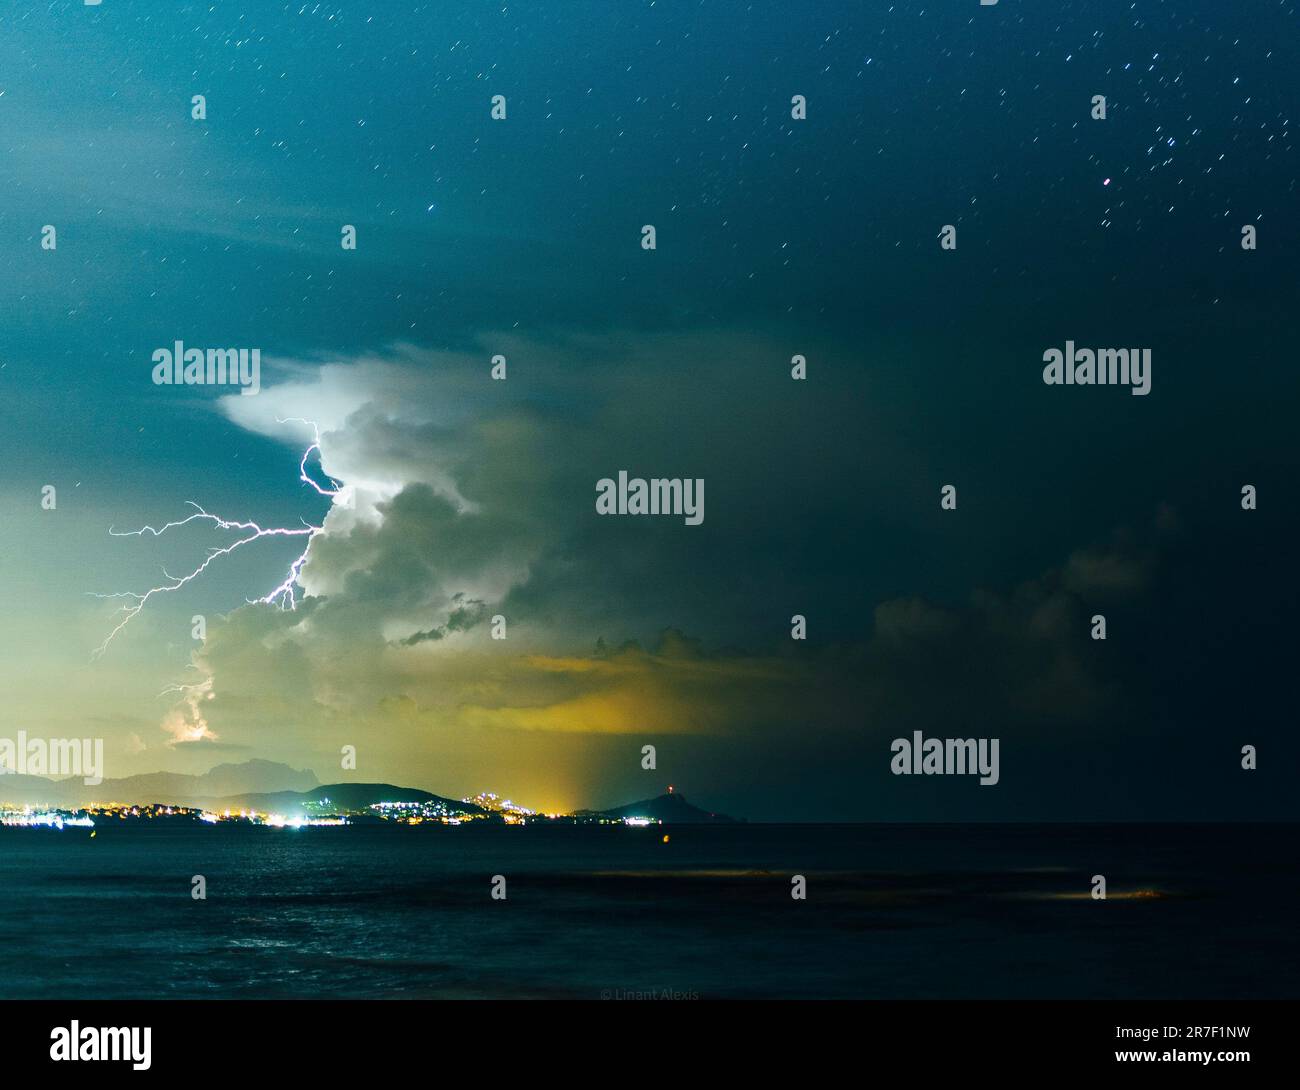 A spectacular sight of a lightning bolt descending from the sky and striking the ocean with the backdrop of majestic mountains in the background Stock Photo